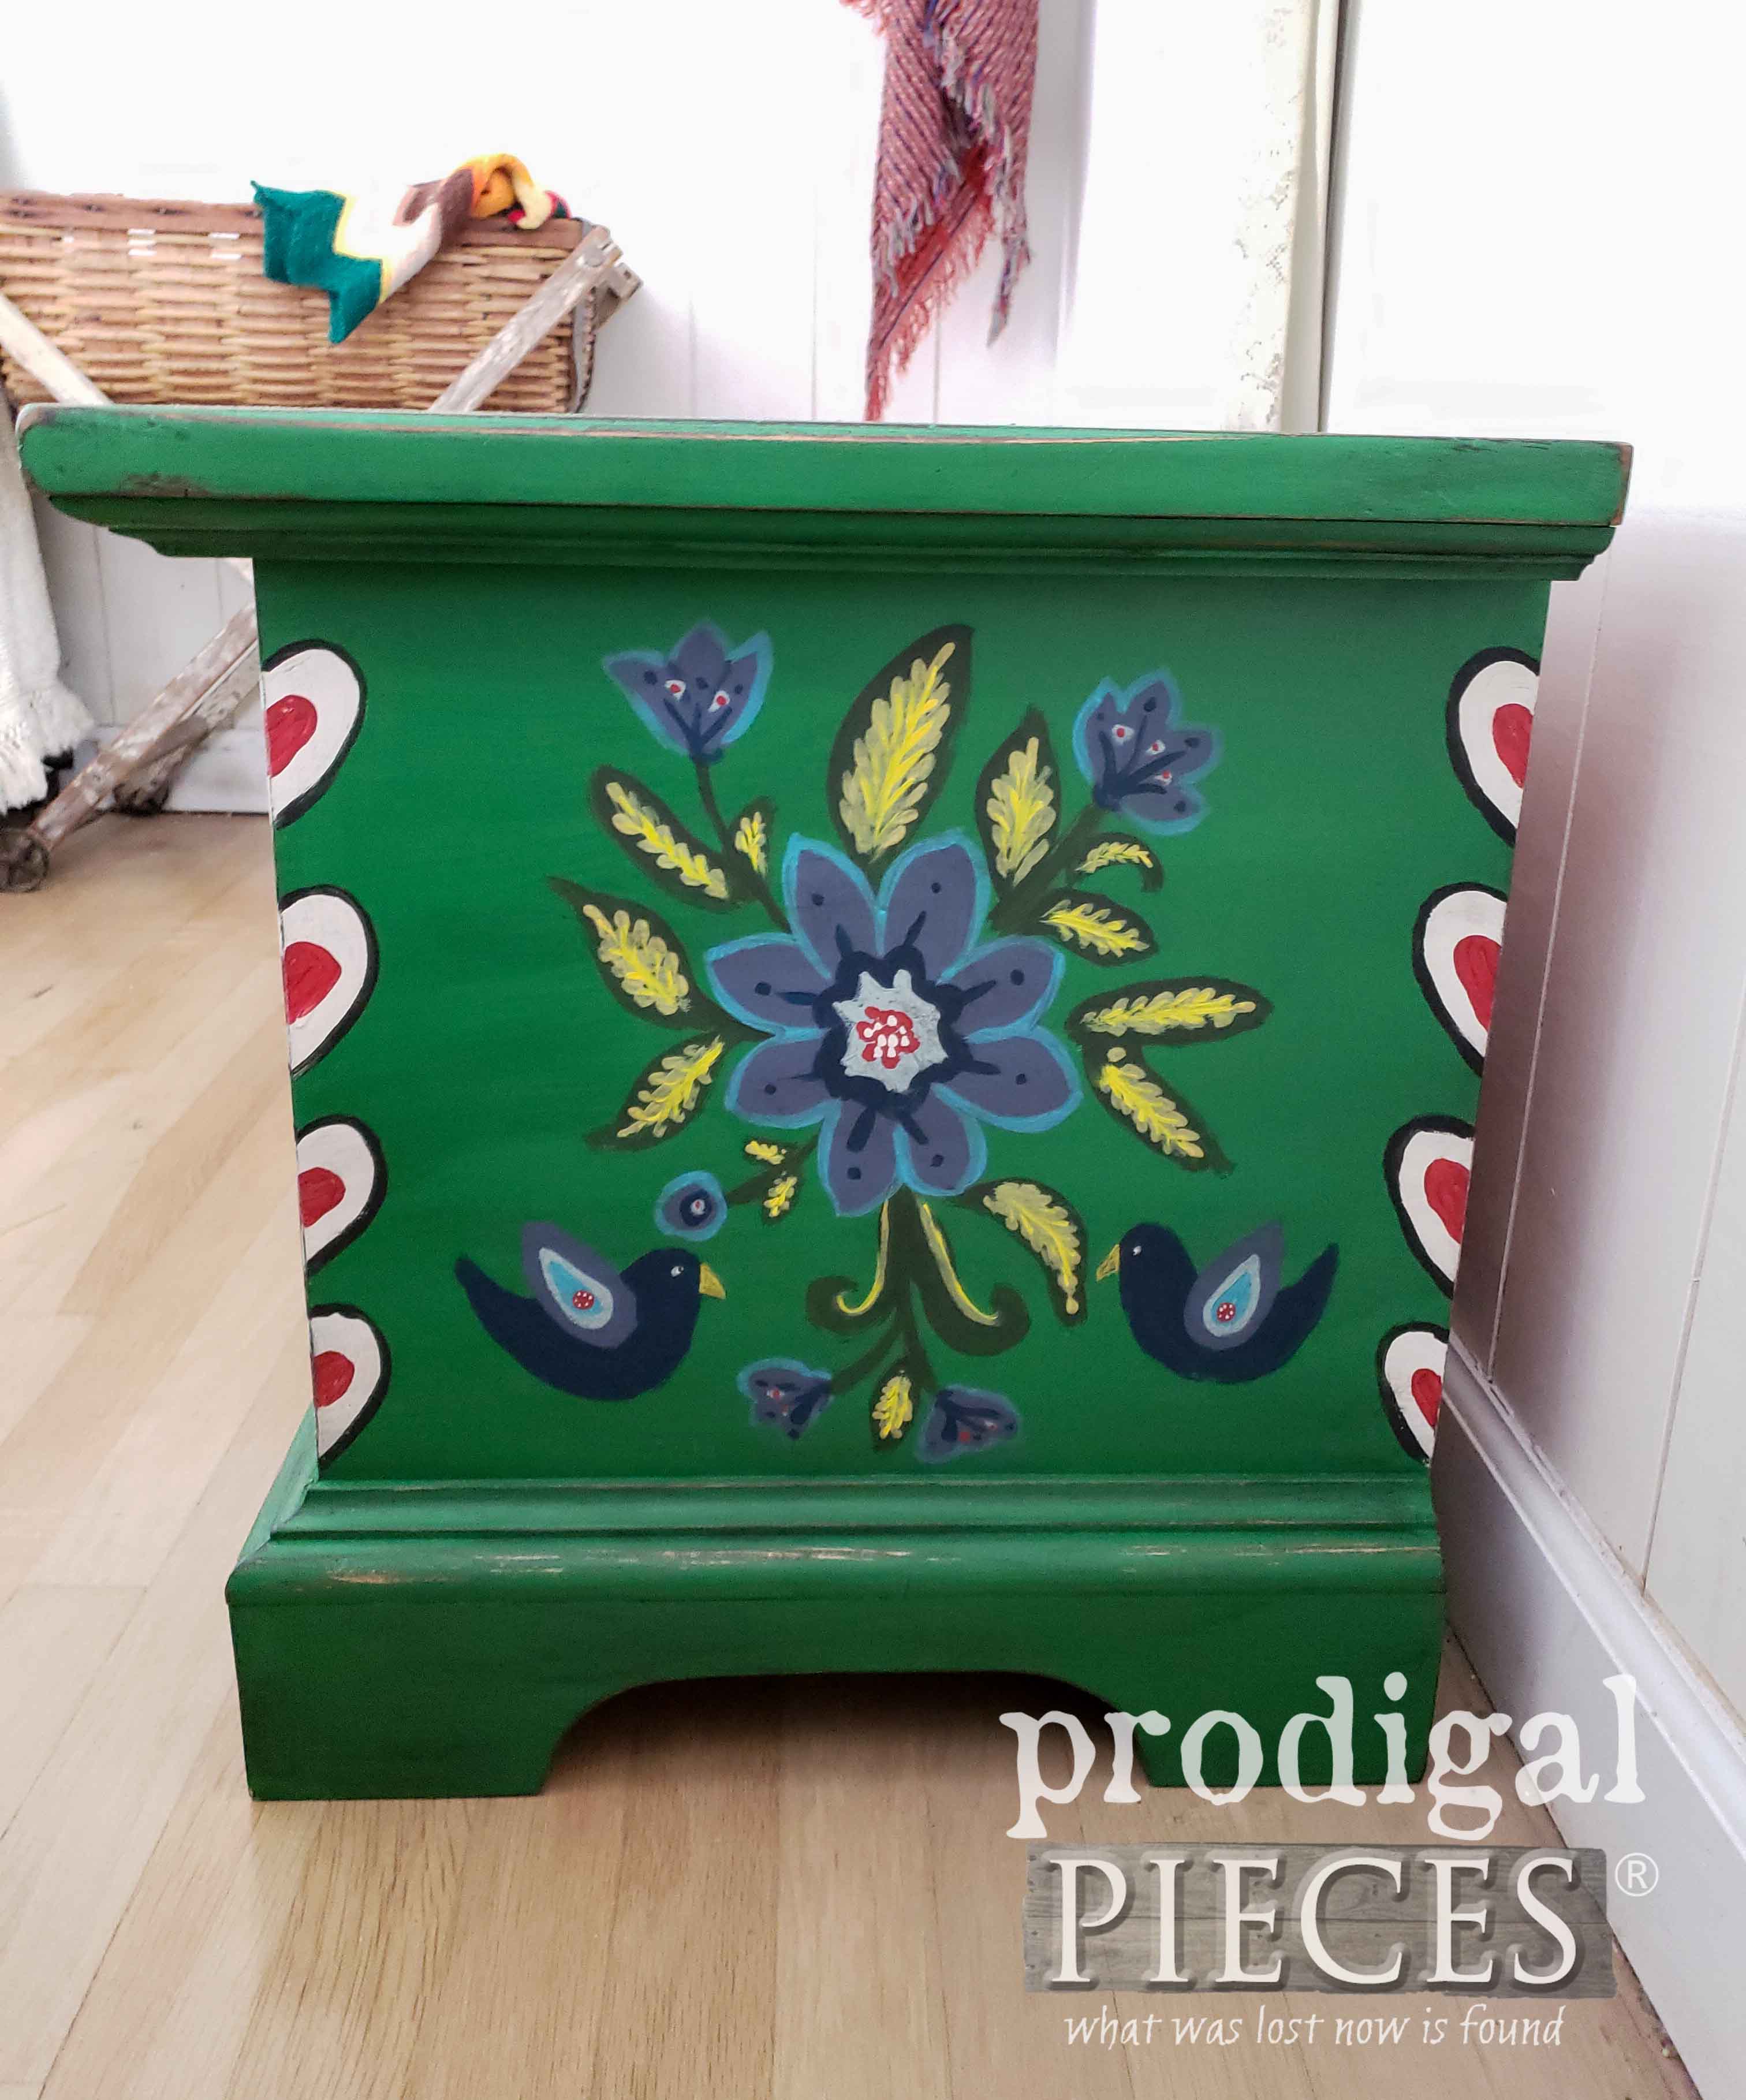 Polish Hand-Painted Furniture with Primitive Folk Art Style by Larissa of Prodigal Pieces | prodigalpieces.com